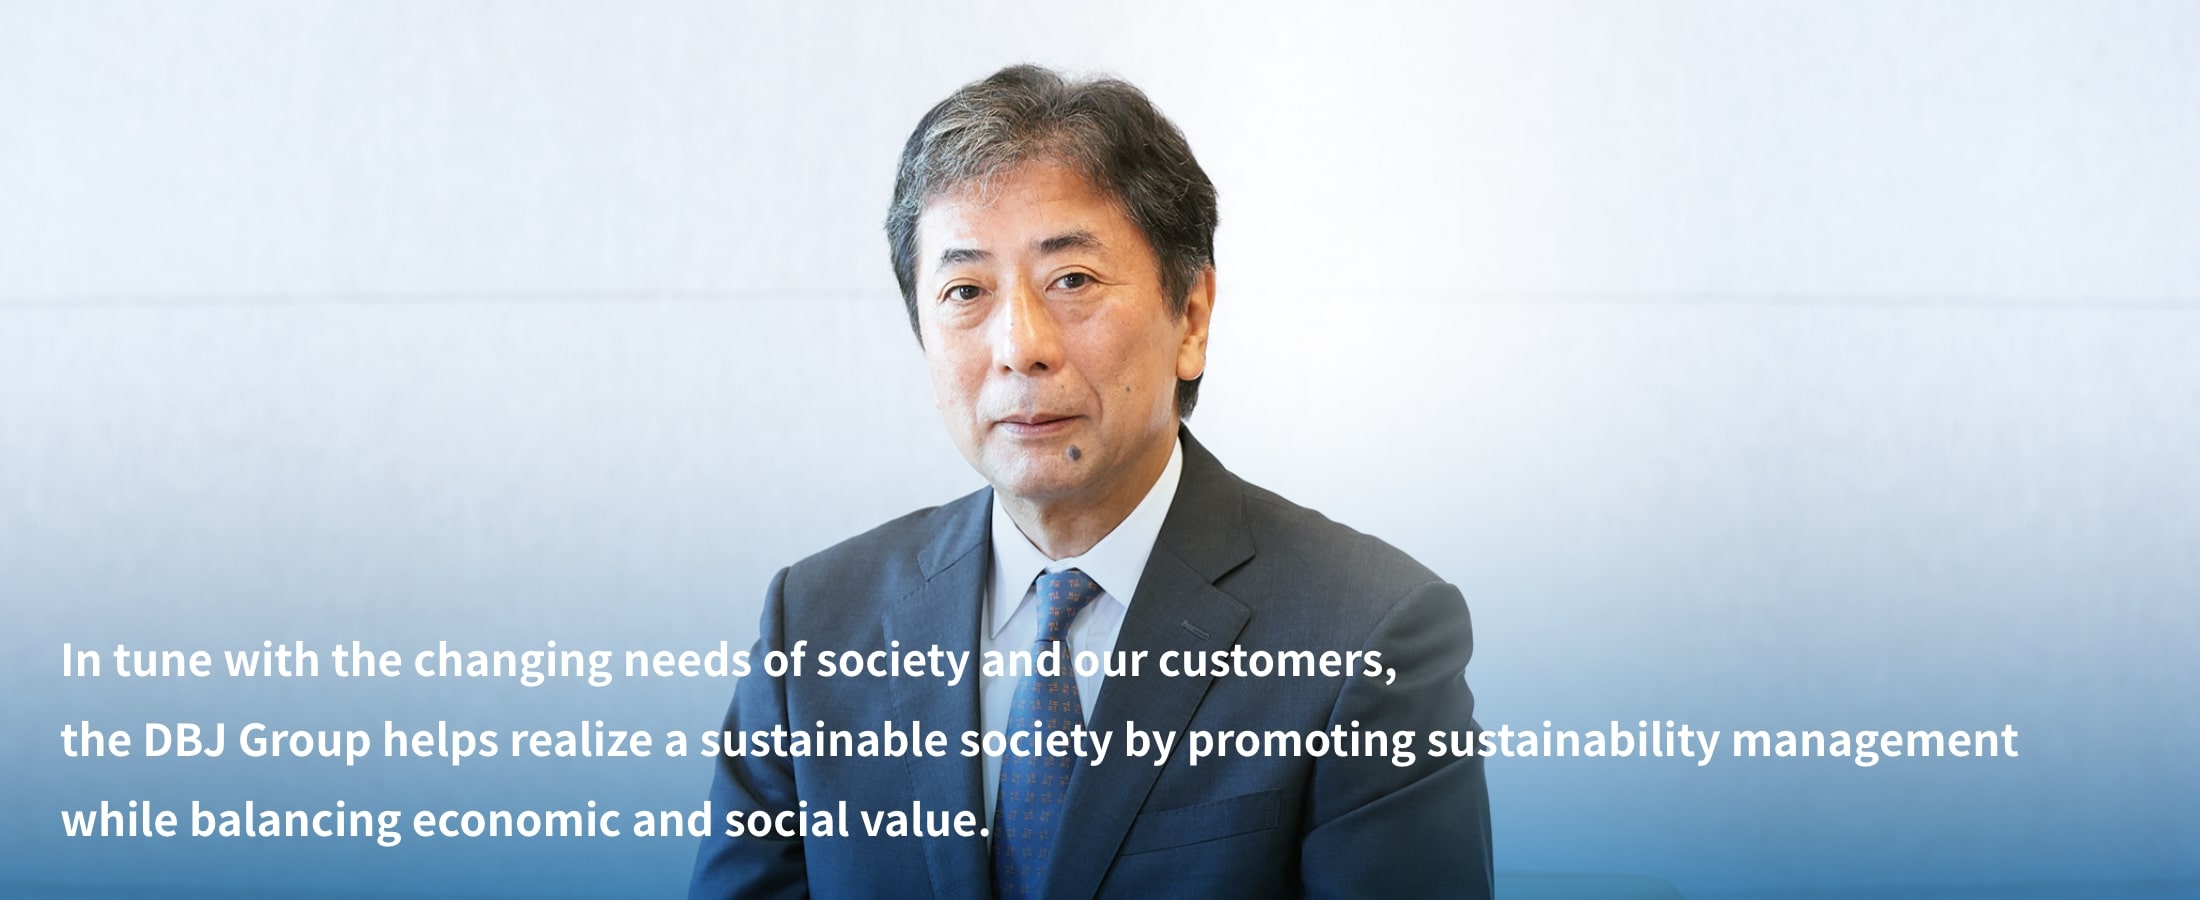 In tune with the changing needs of society and our customers, the DBJ Group helps realize a sustainable society by promoting sustainability management while balancing economic and social value.